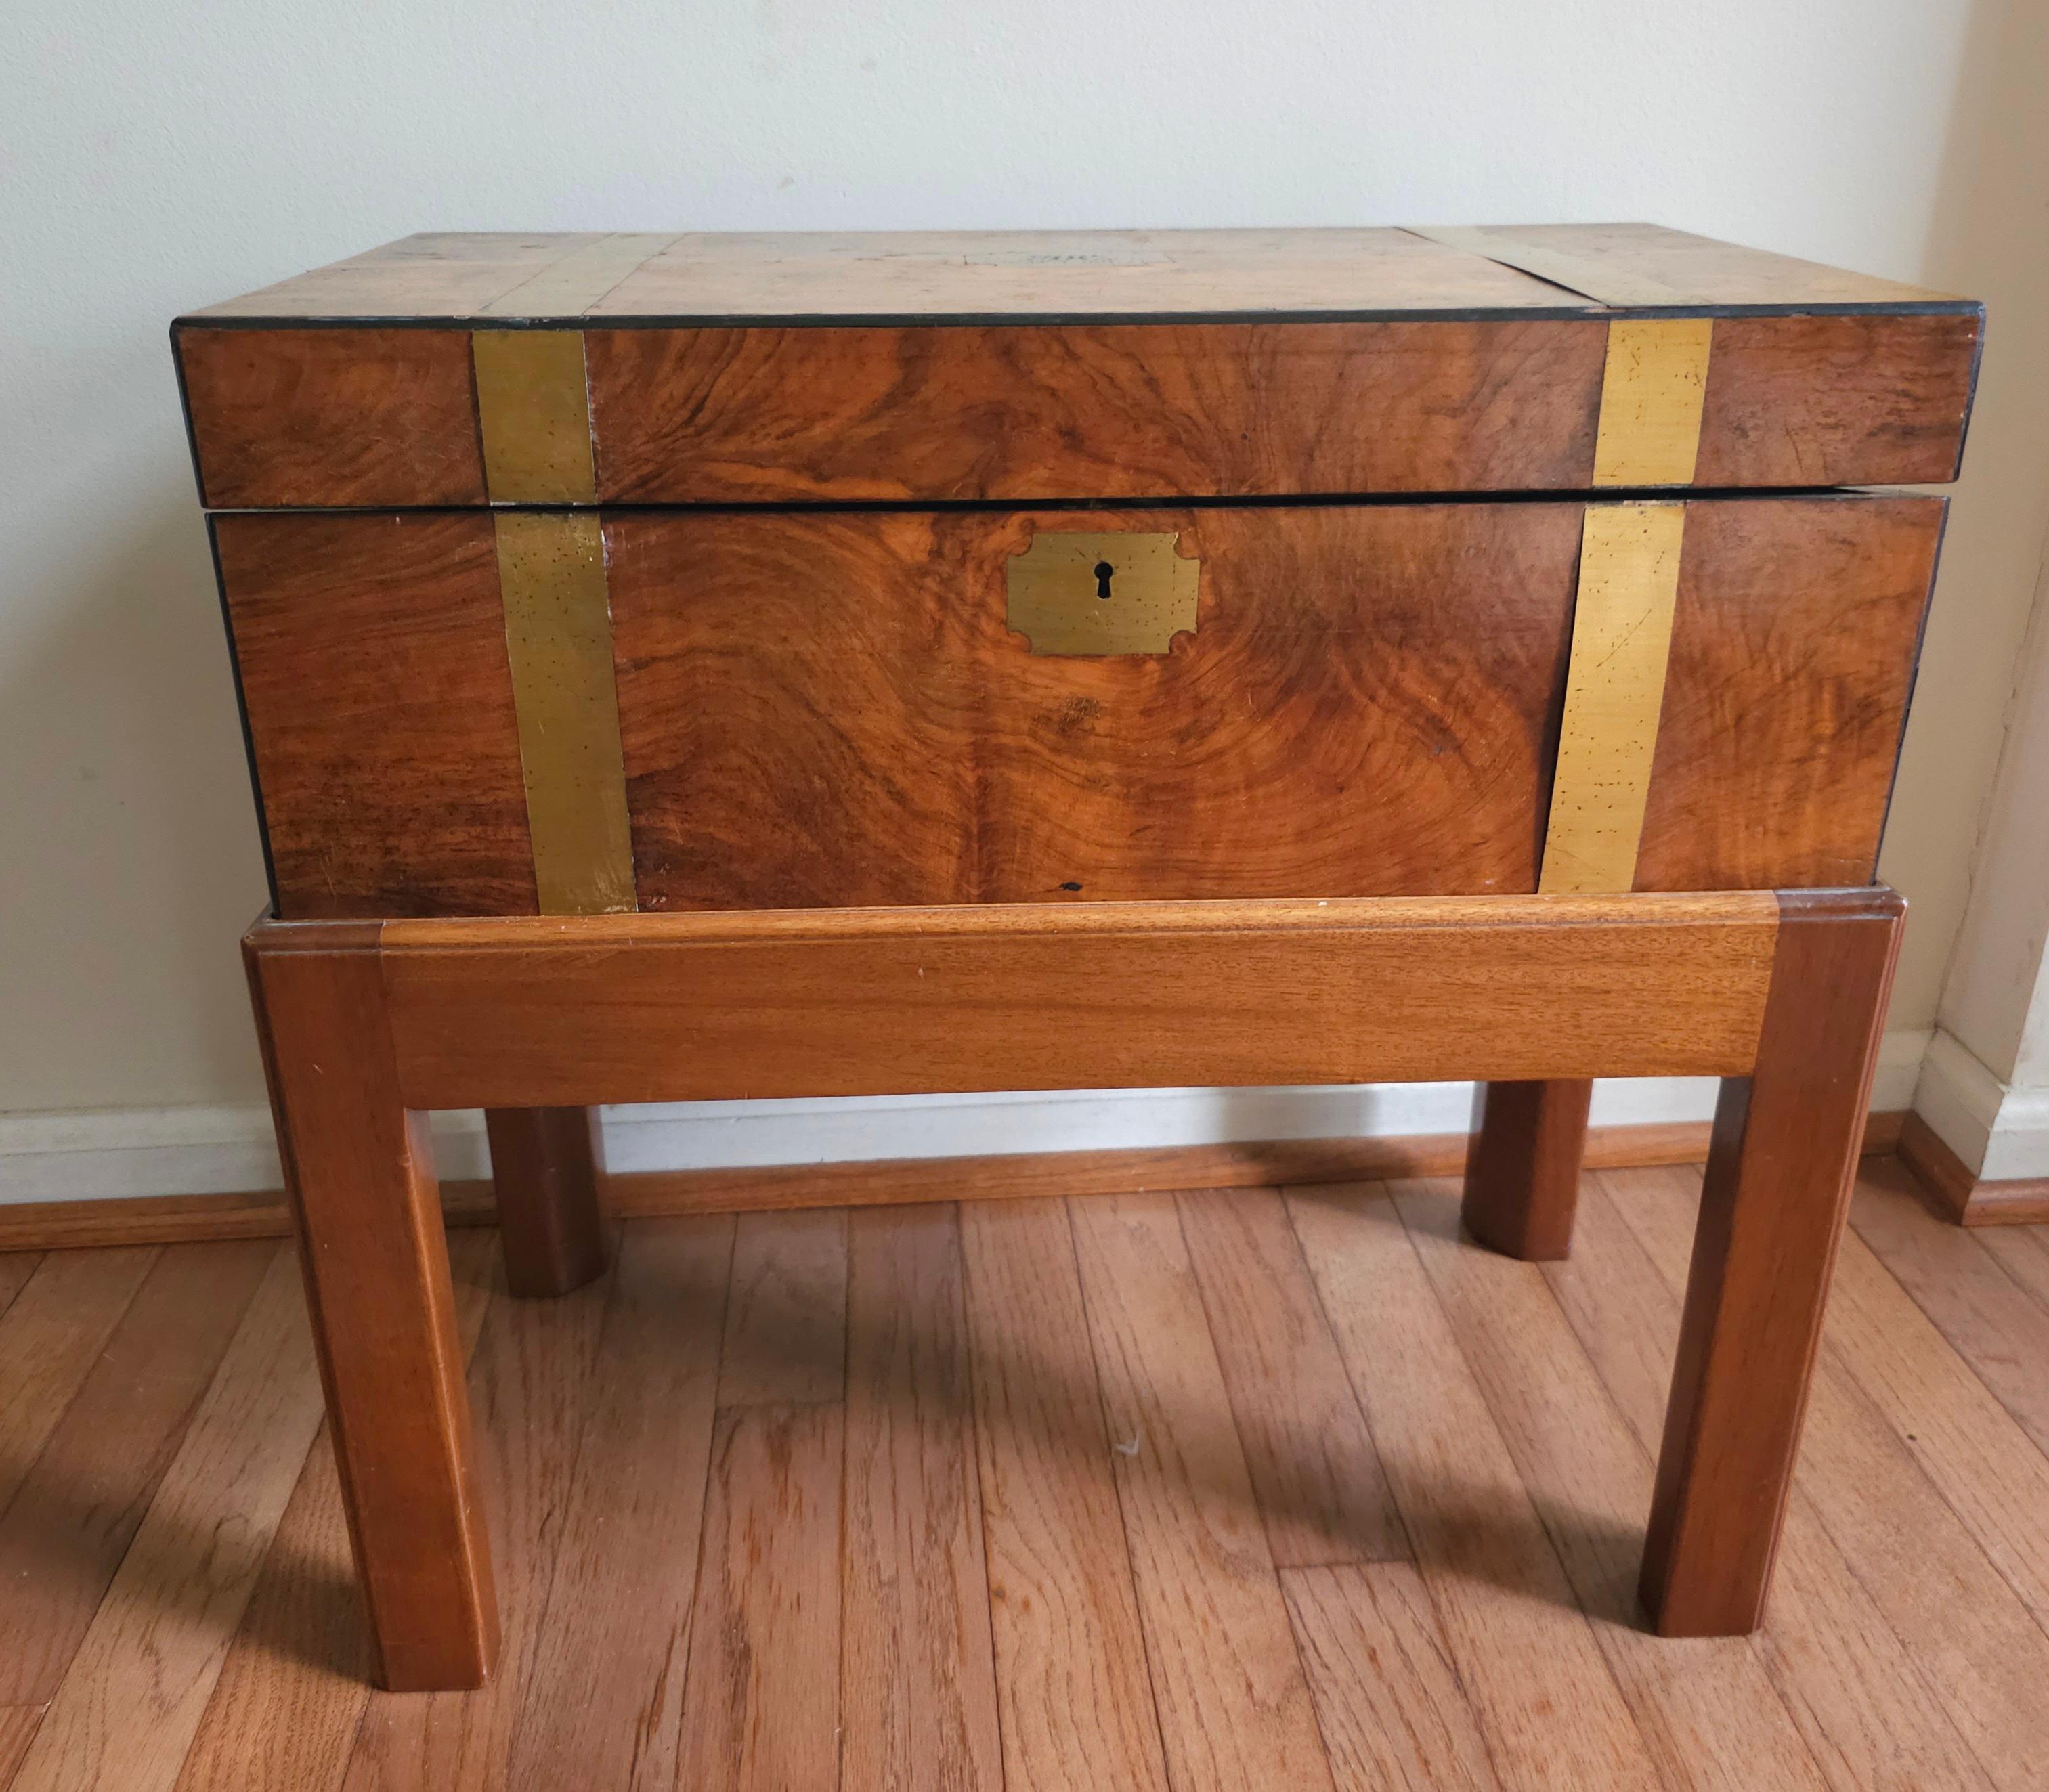 A 1911  Mahogany , brass inlays and leather inset traveling lap desk on stand. Measures 20.5